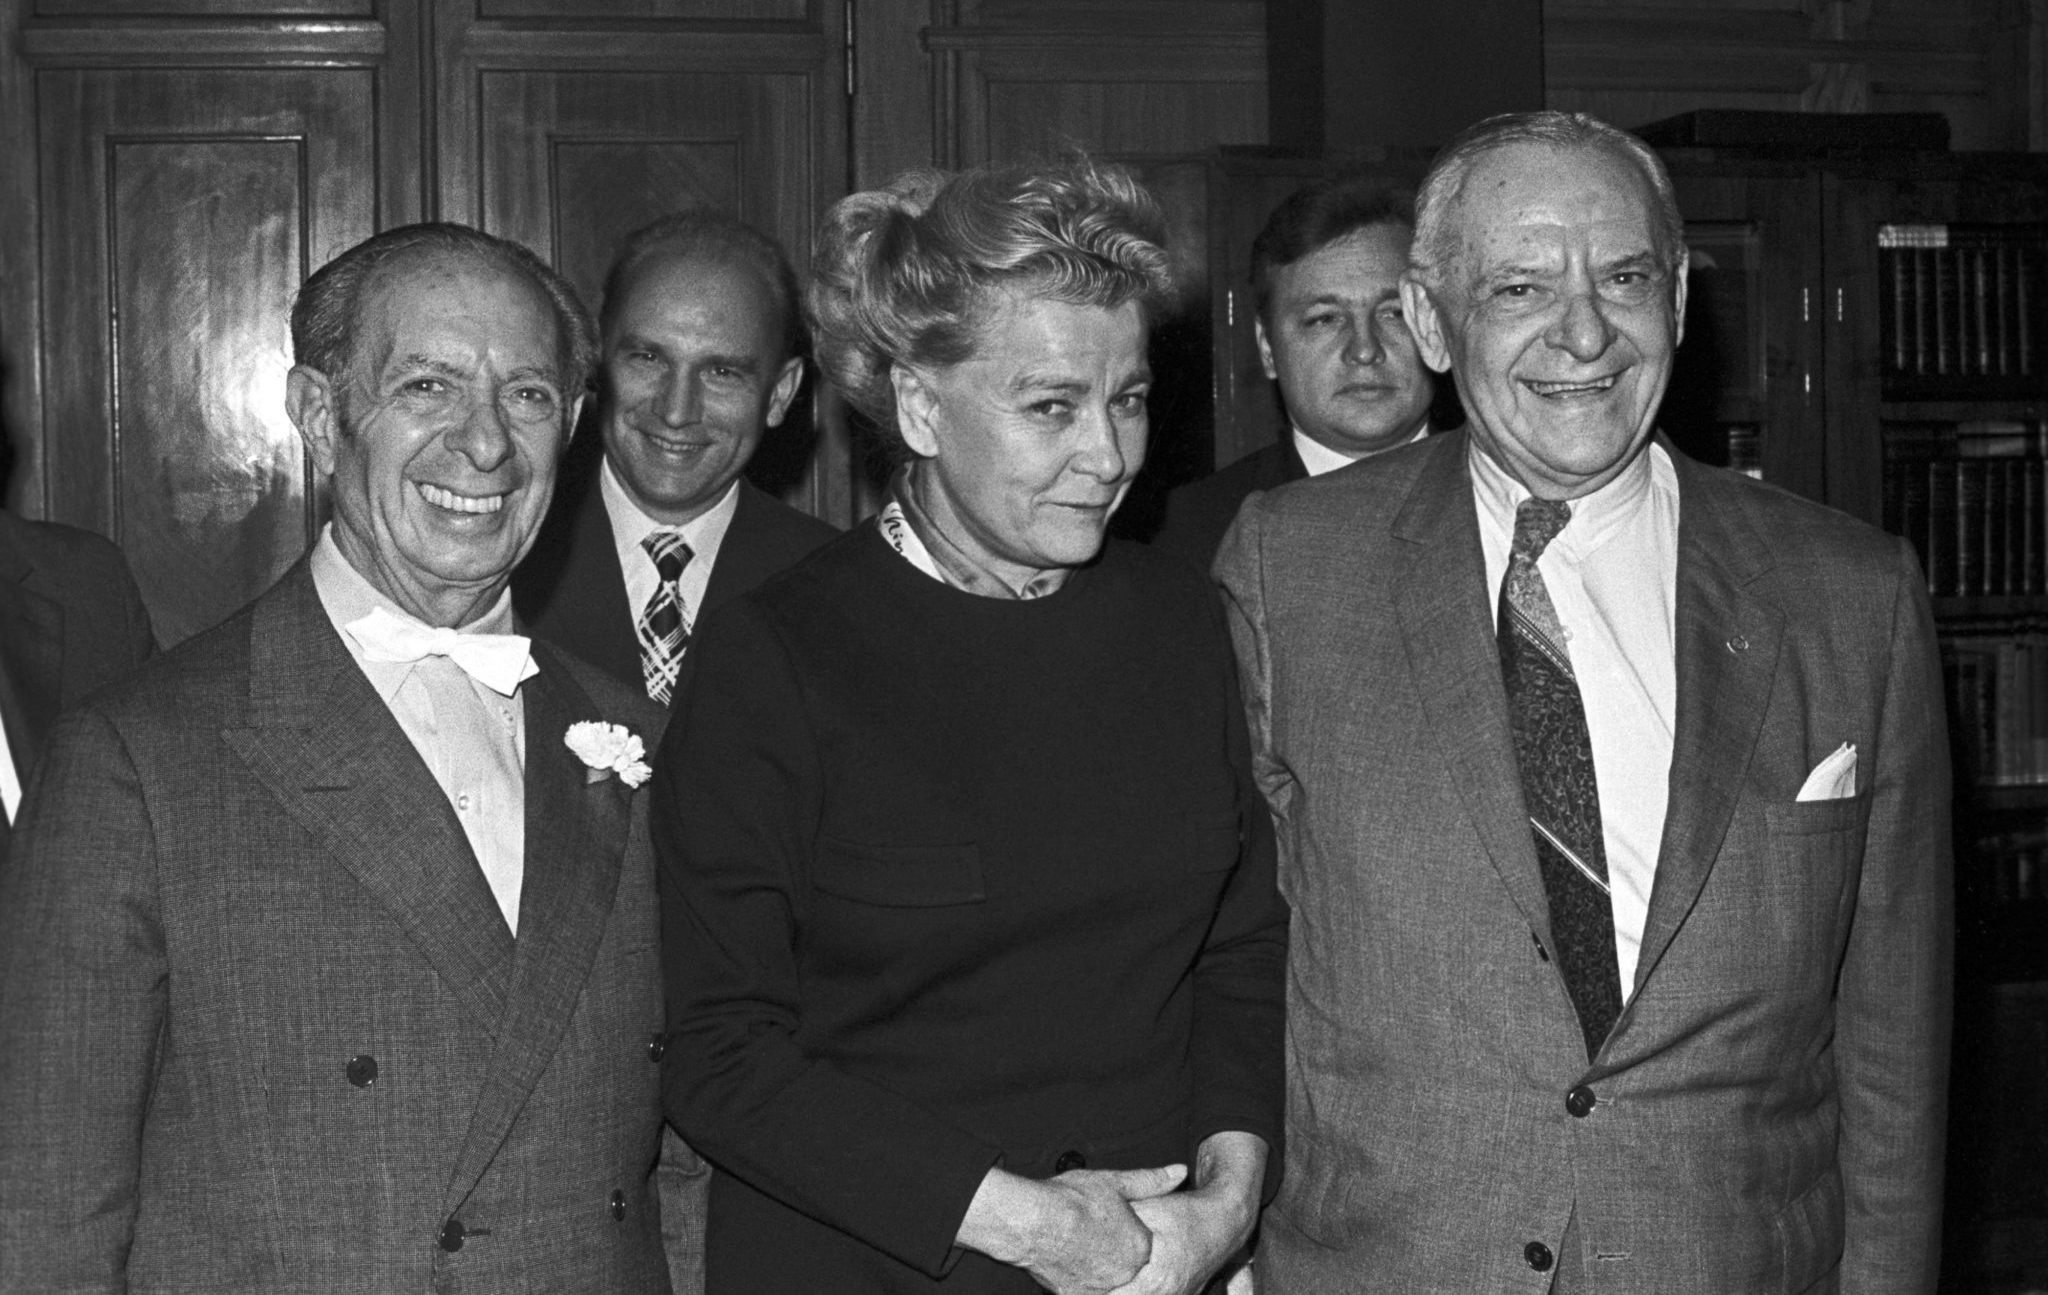 Soviet Minister of Culture Yekaterina Furtseva and American magnate Armand Hammer in Moscow, 1972